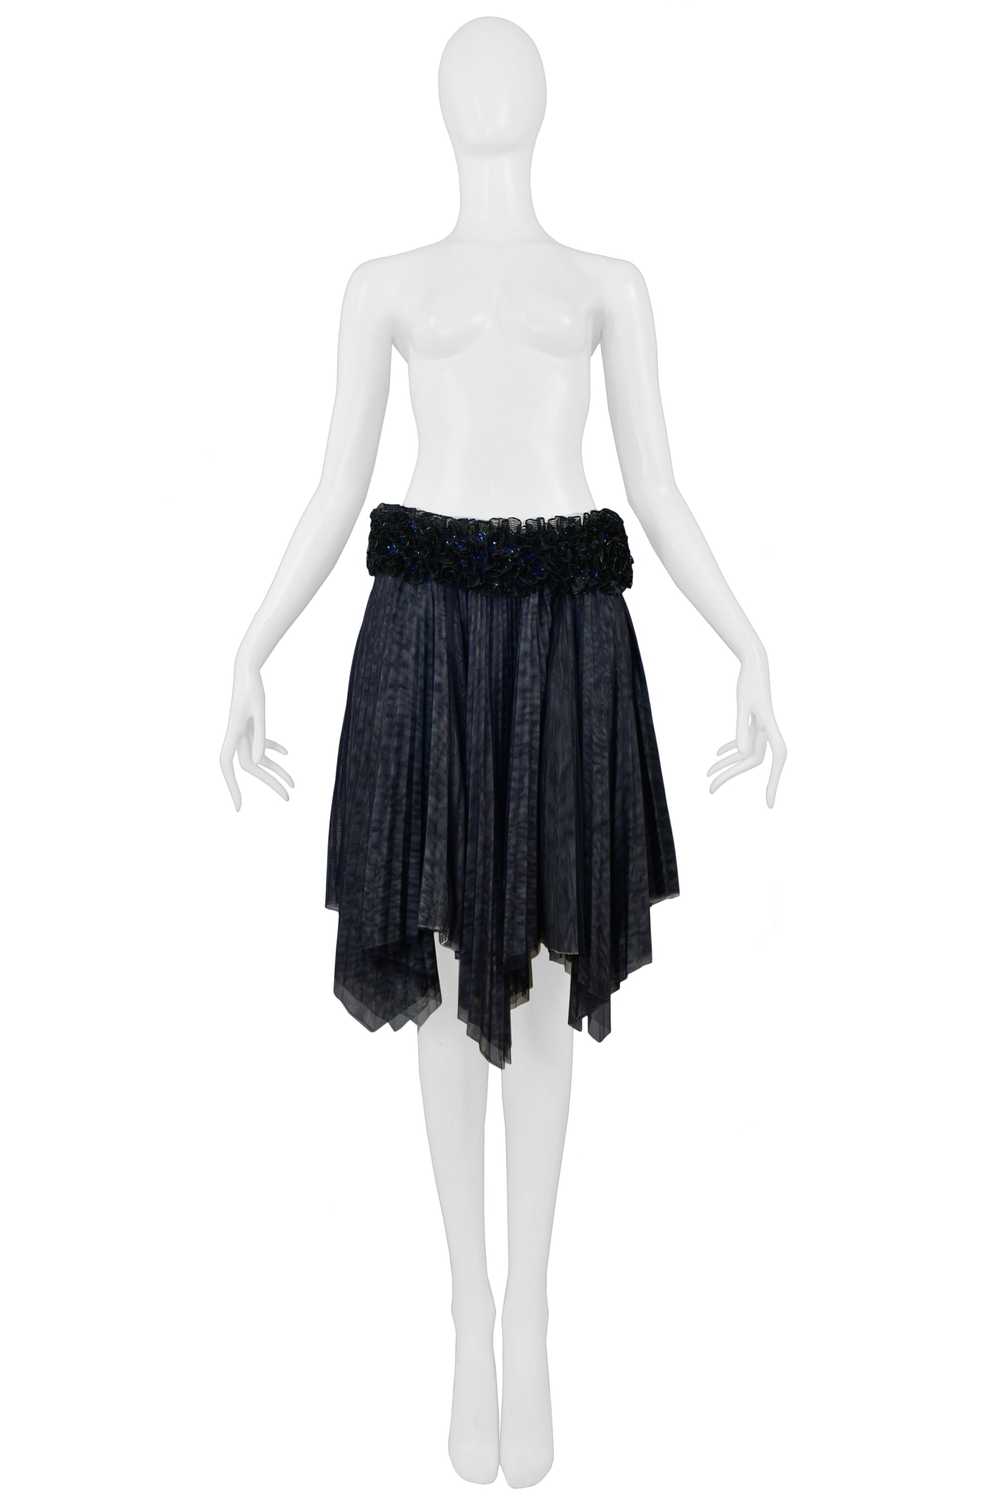 CHANEL PLEATED SKIRT WITH FLORAL SEQUIN WAISTBAND - image 3